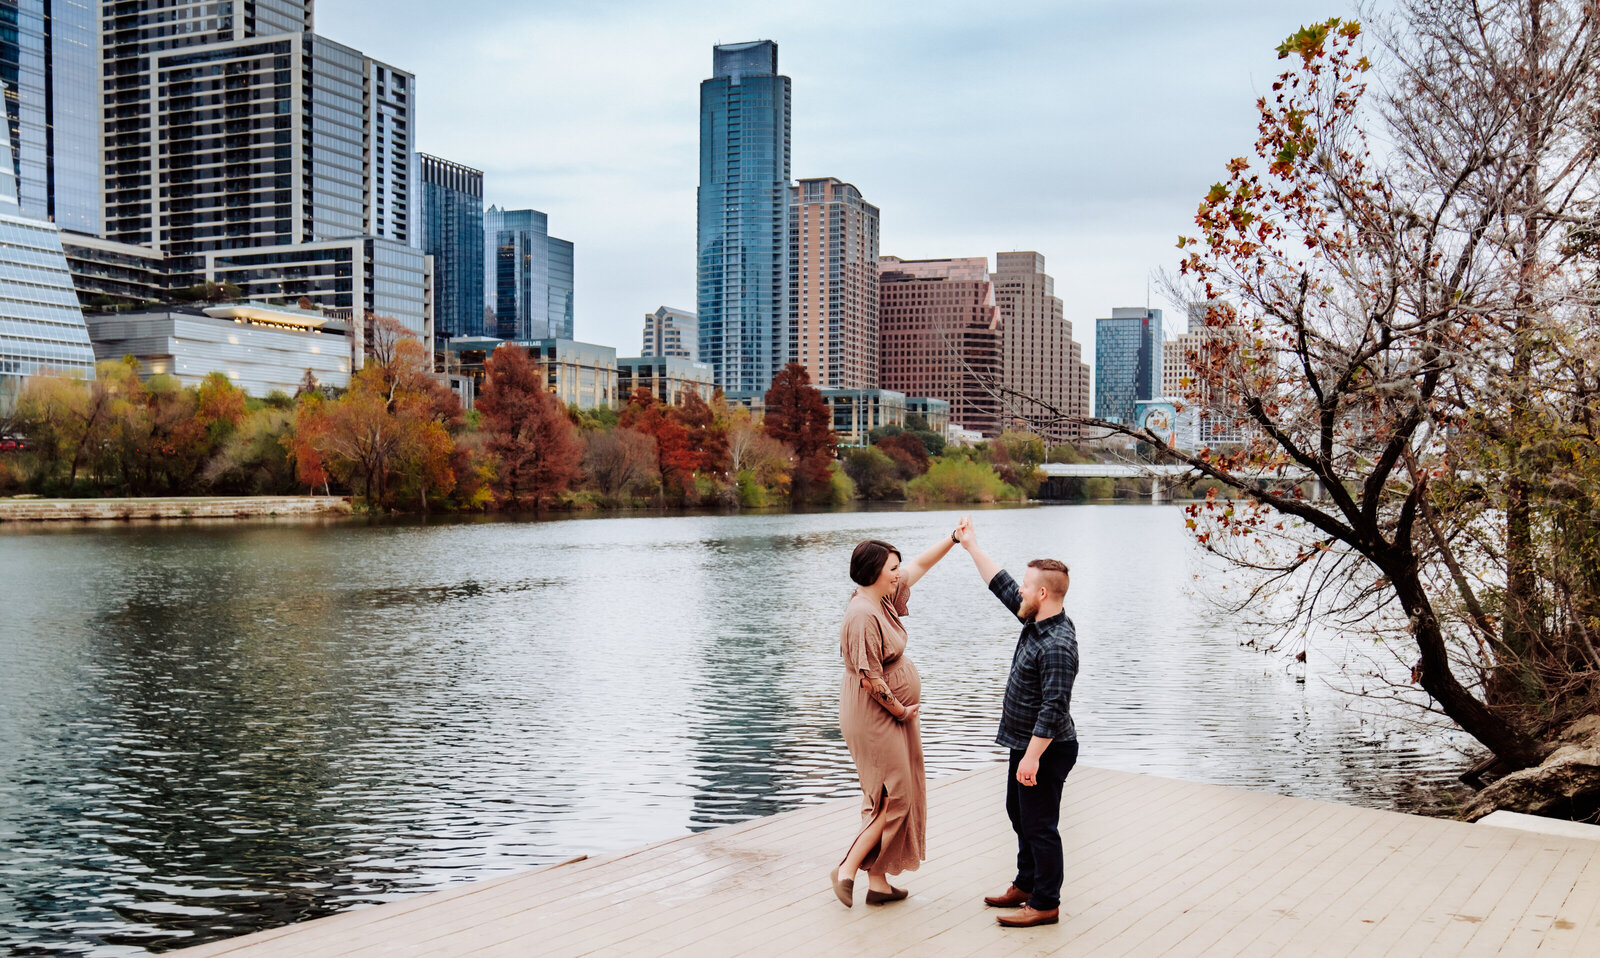 Maternity Photographer, a man and woman dance on a platform near the river, cityscape just across the water